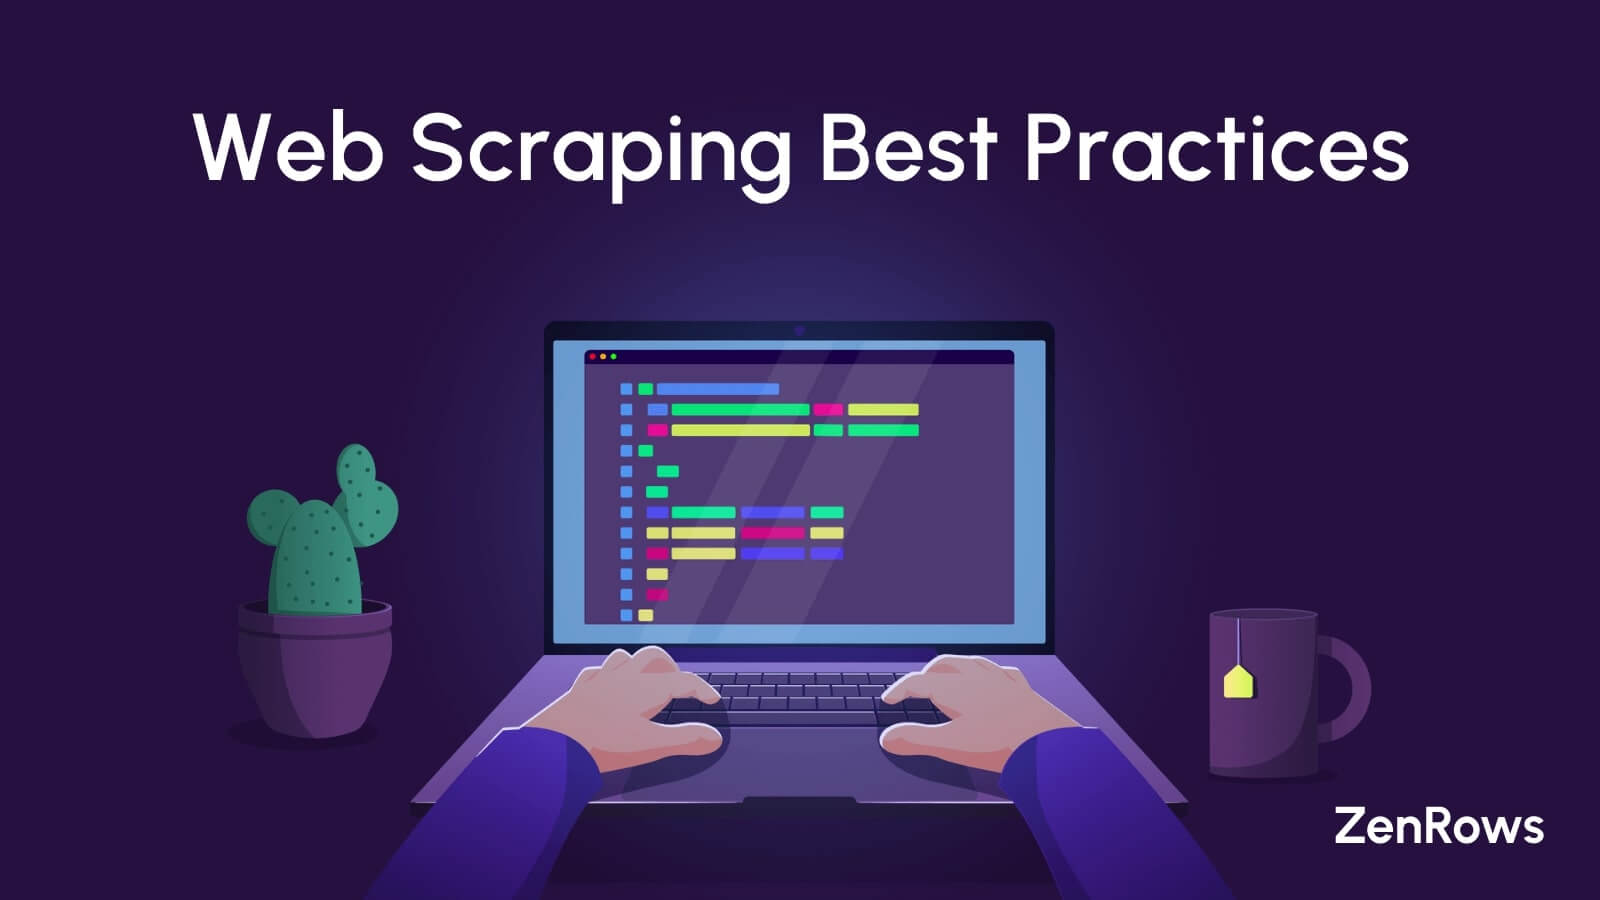 Web Scraping Best Practices and Tools 2022